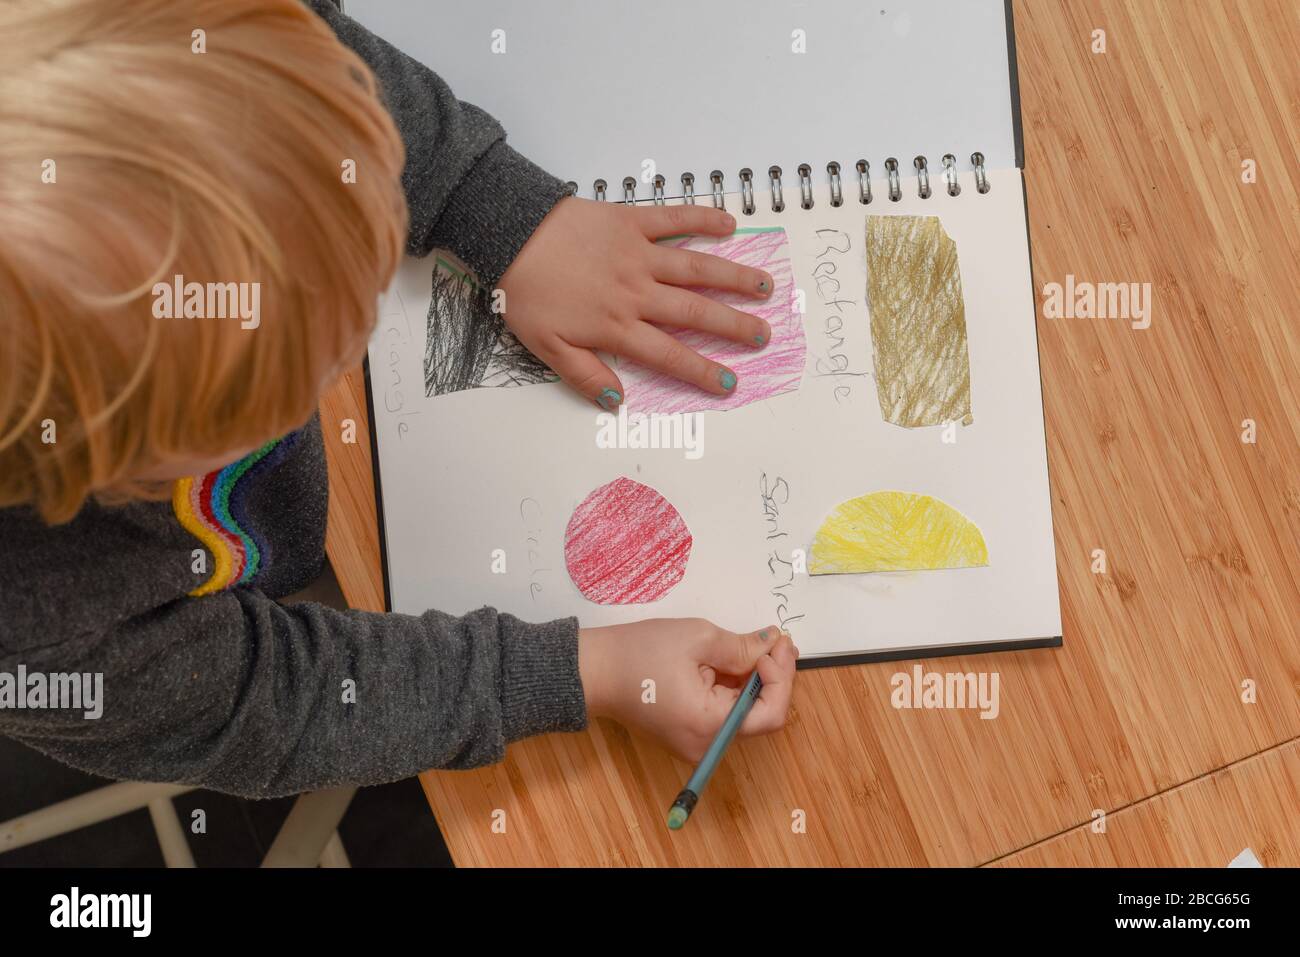 Child learning at home. Pre school age child learning about shapes and hand writing Stock Photo